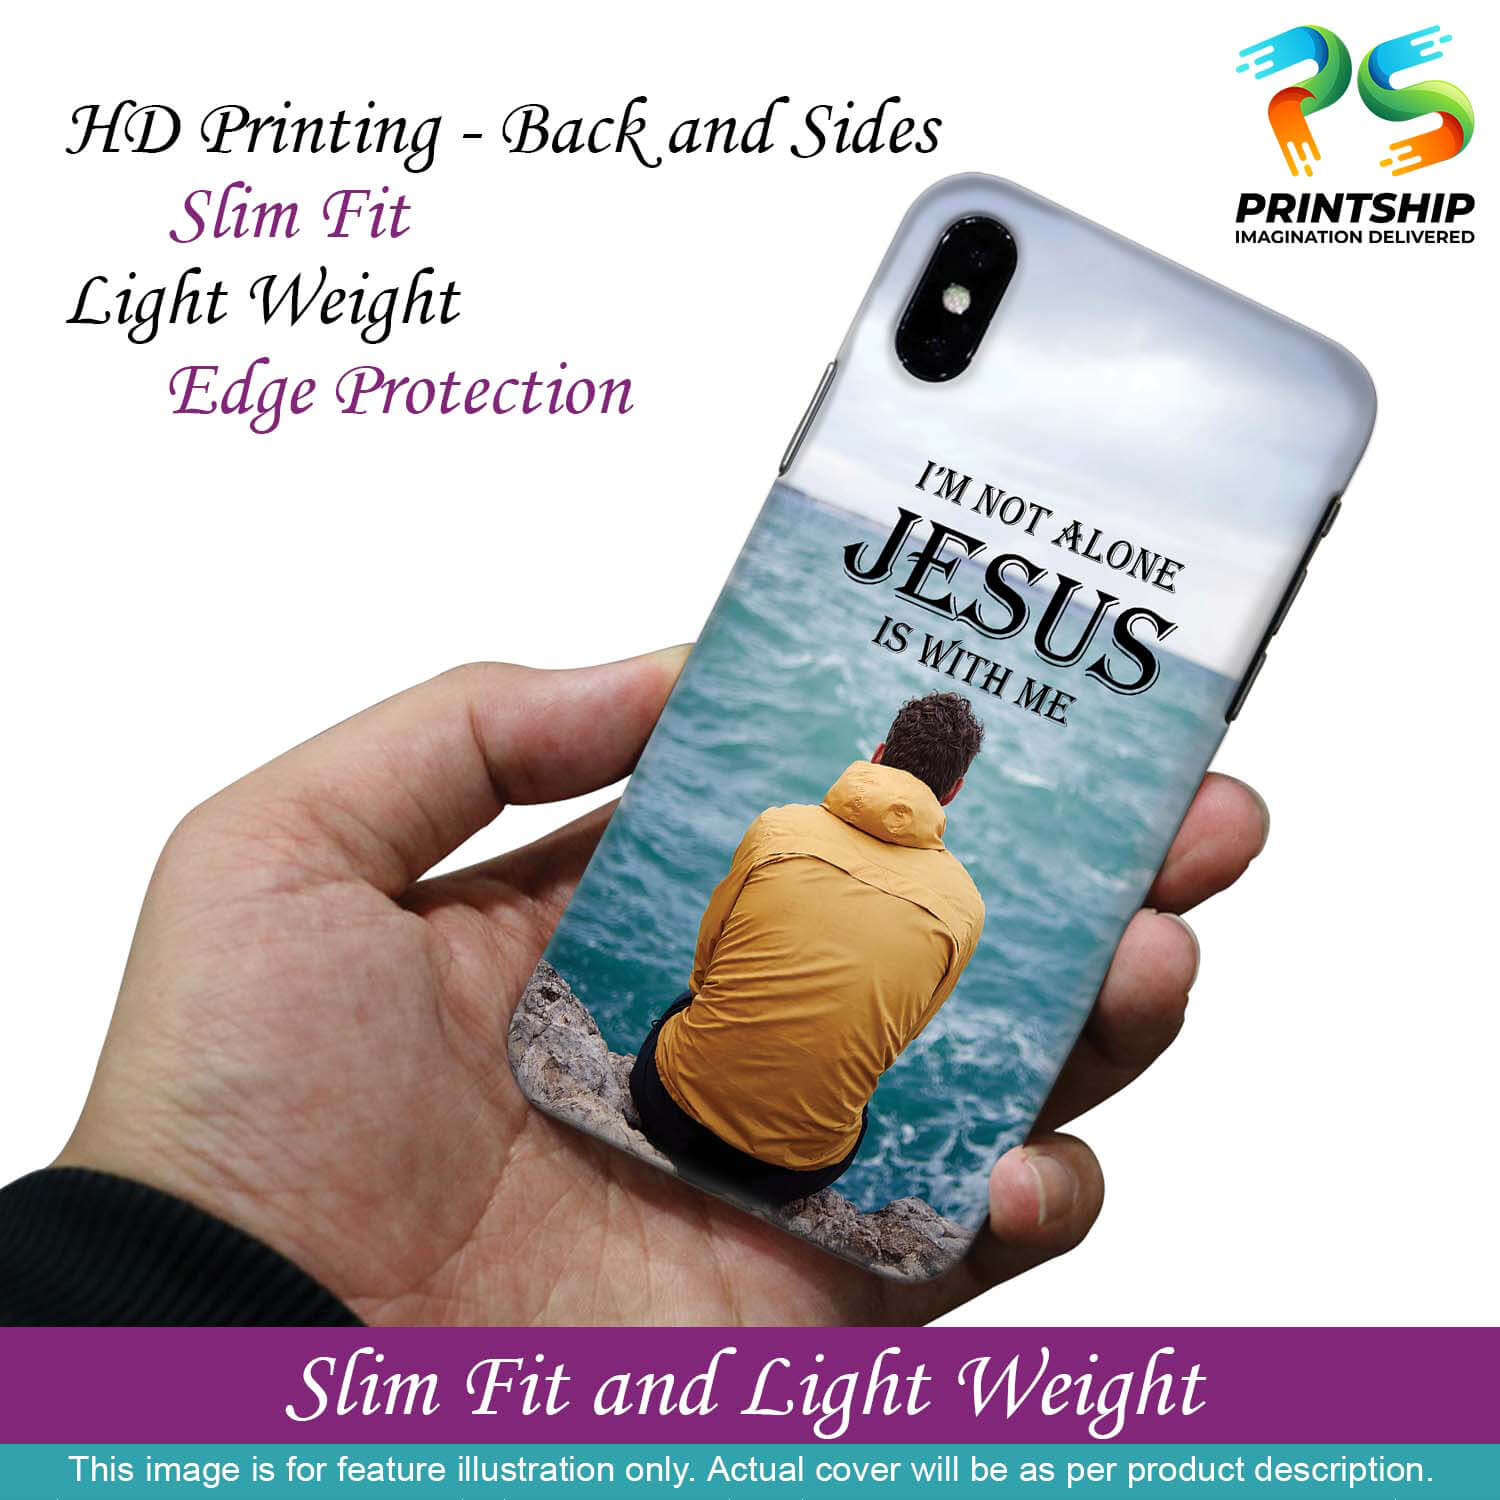 W0007-Jesus is with Me Back Cover for Samsung Galaxy S20 Ultra 5G